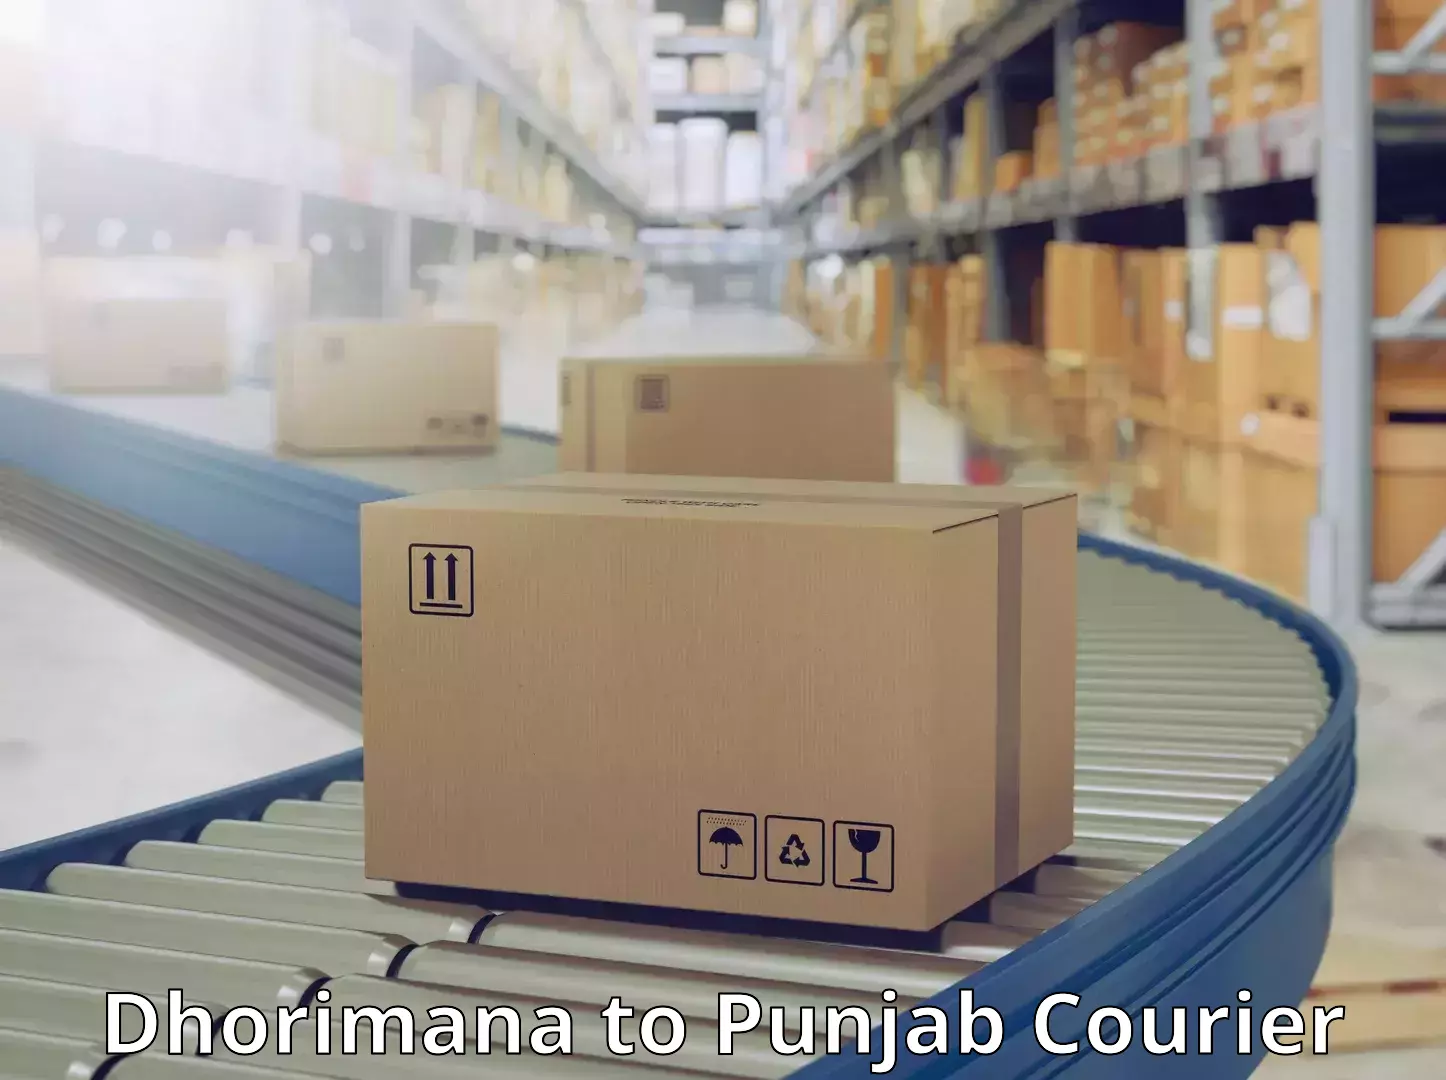 Subscription-based courier Dhorimana to Punjab